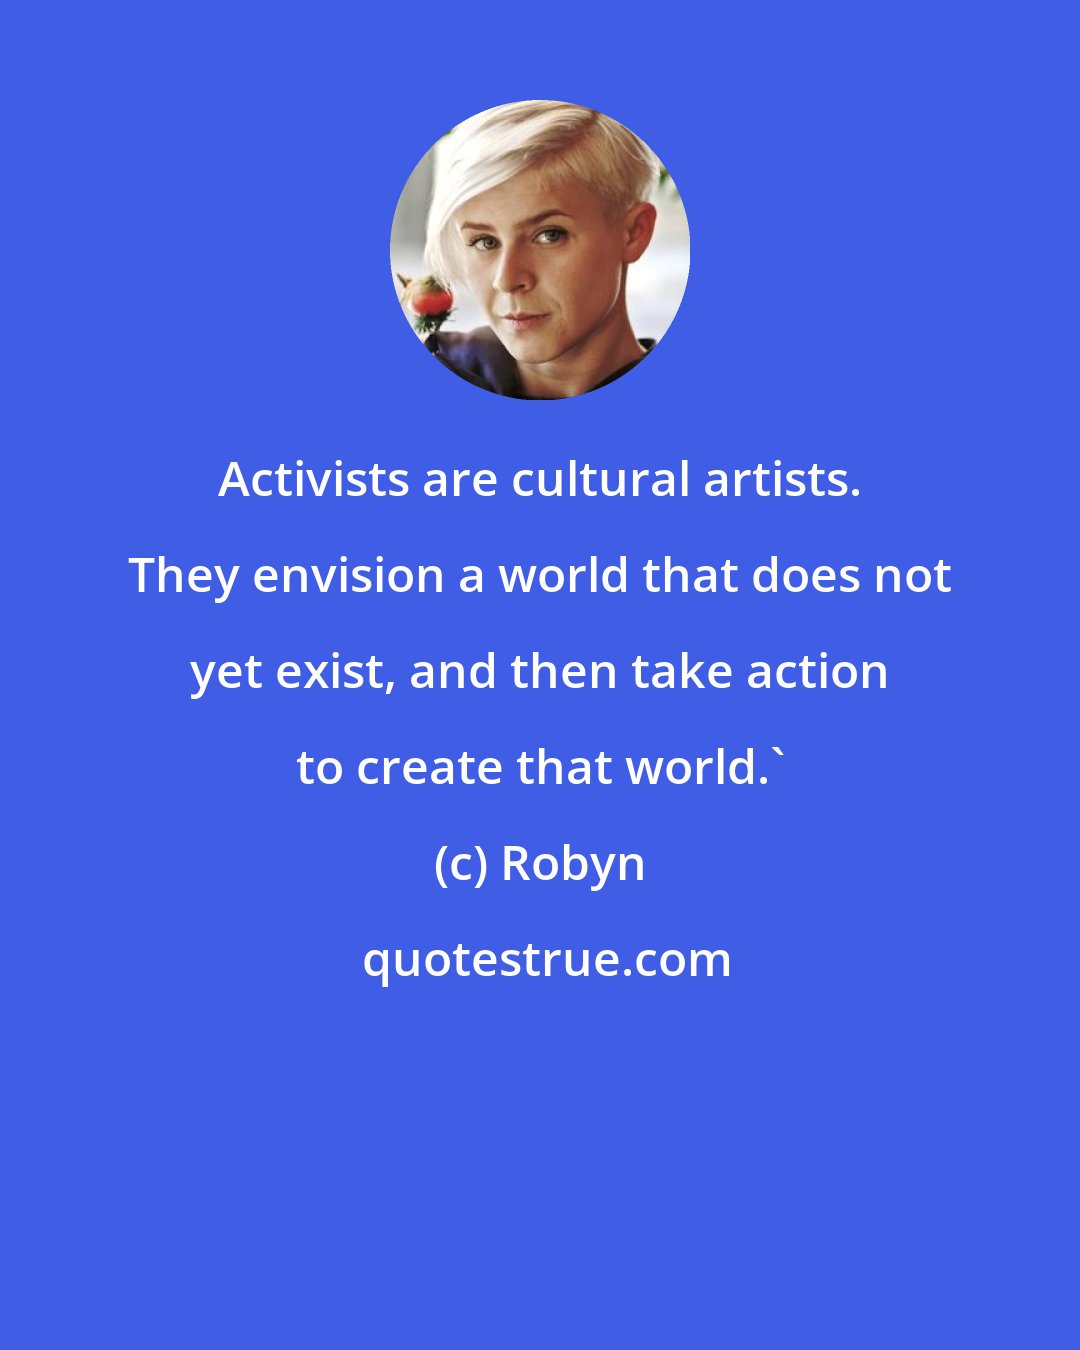 Robyn: Activists are cultural artists. They envision a world that does not yet exist, and then take action to create that world.'